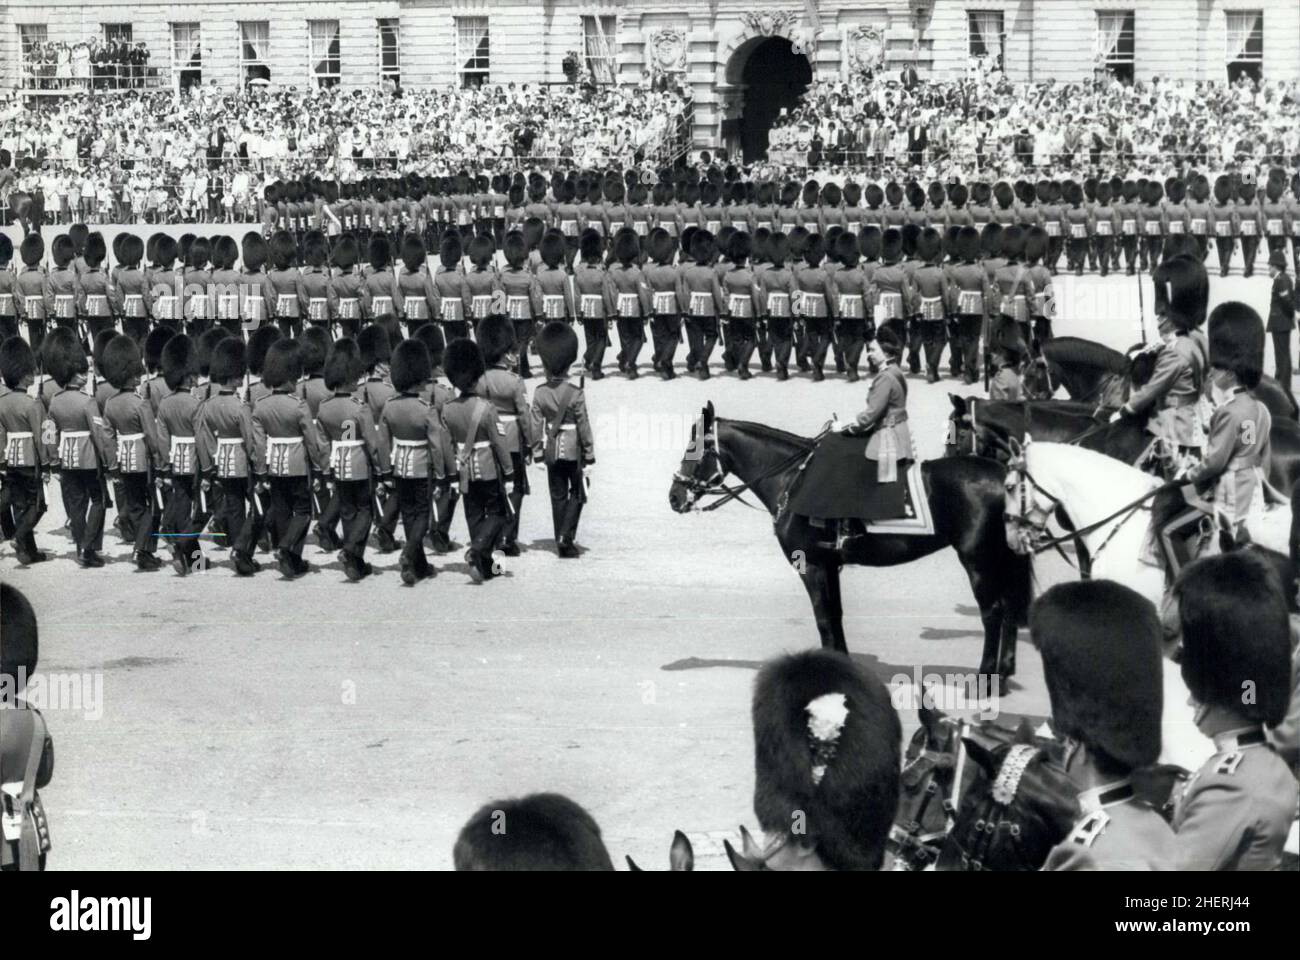 London, England, UK. 03rd June, 1978. The annual Trooping the Colour Ceremony took place today to mark the official birthday of Her Majesty on Horse Guards Parade. The Colour Trooped was that of the 2nd Battalion Grenadier Guards. H.M. QUEEN ELIZABETH II, right, on her horse 'Burmese' watches the march past during the Trooping the Colour Ceremony on Horse Guards Parade today. Credit: Keystone Press Agency/ZUMA Wire/Alamy Live News Stock Photo